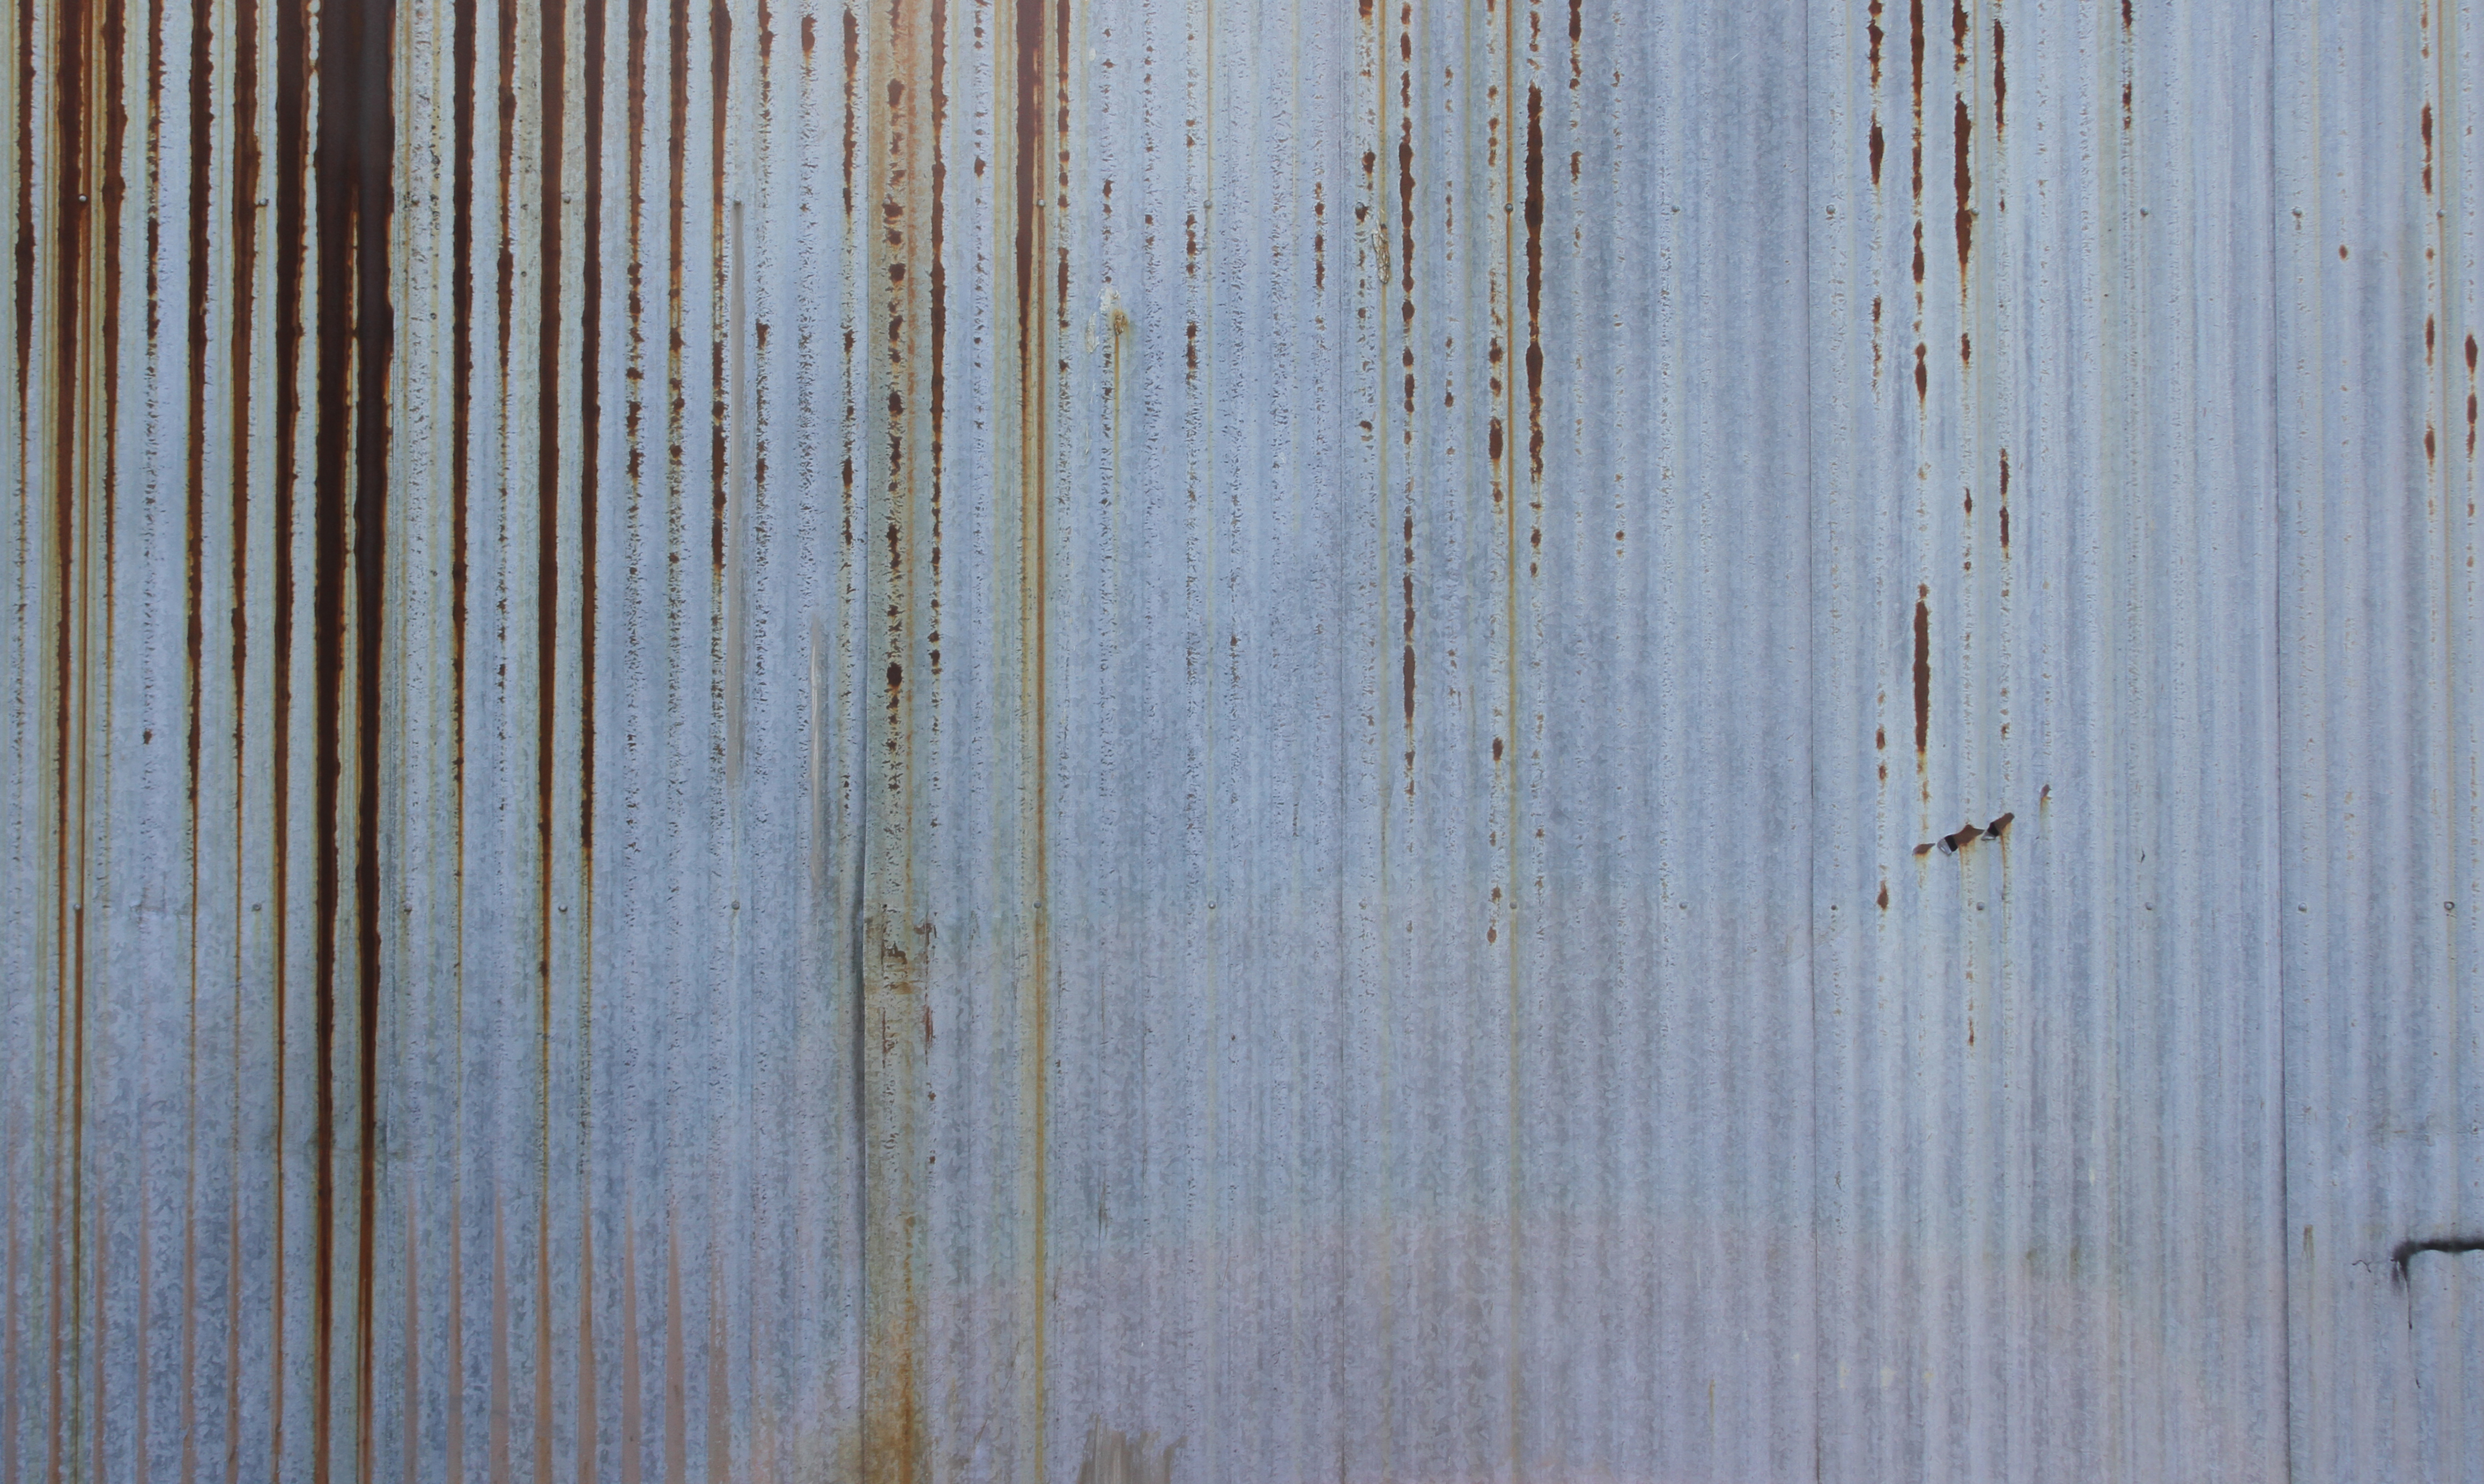 Rusty Corrugated Metal Texture 5 - 14Textures